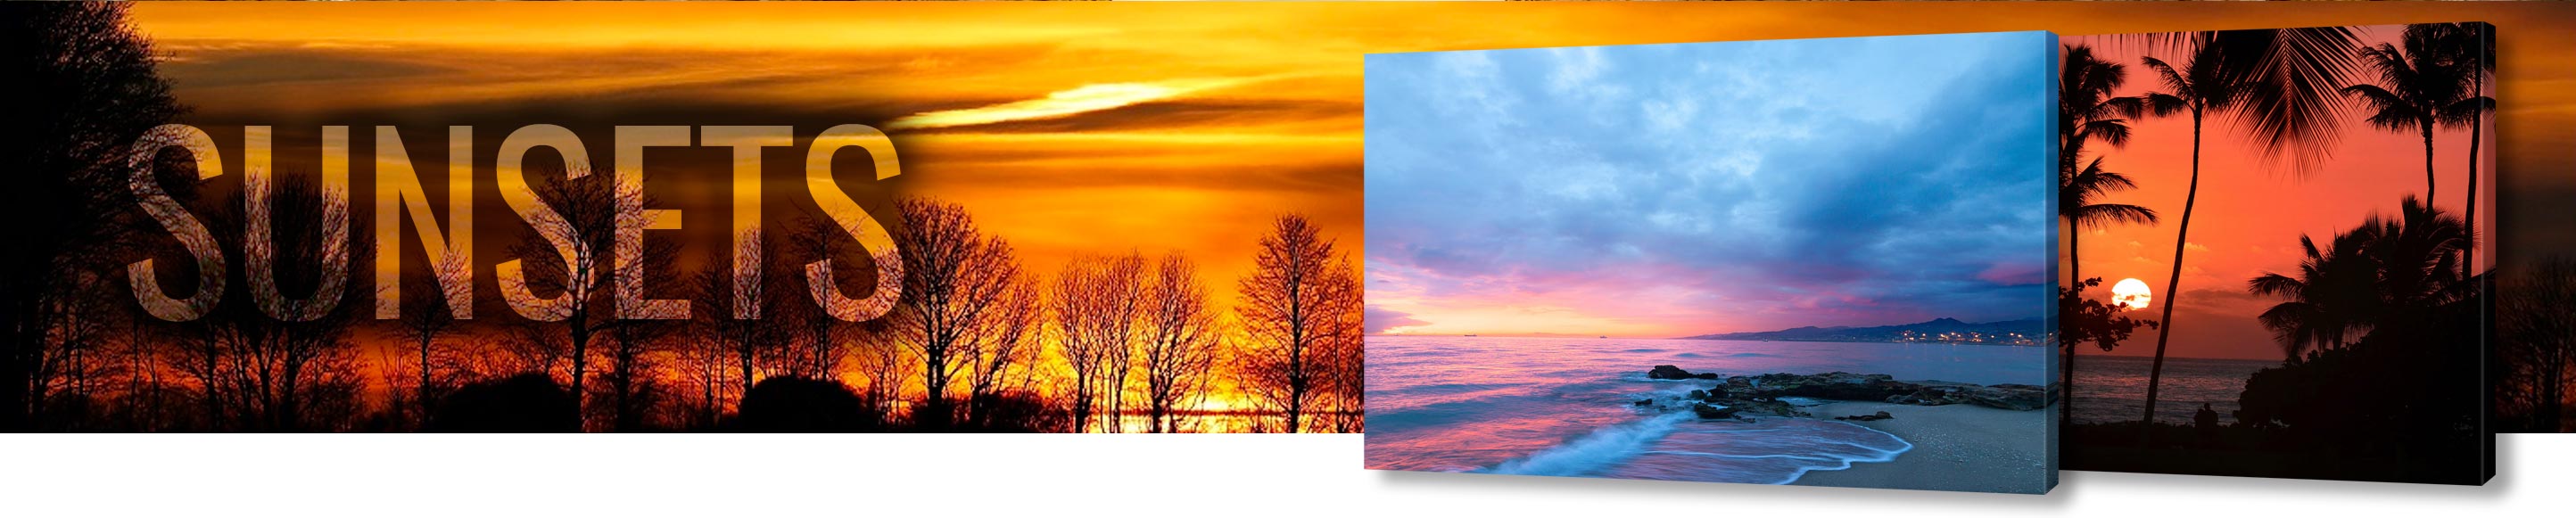 large-canvas-wrap-banner-sunsets